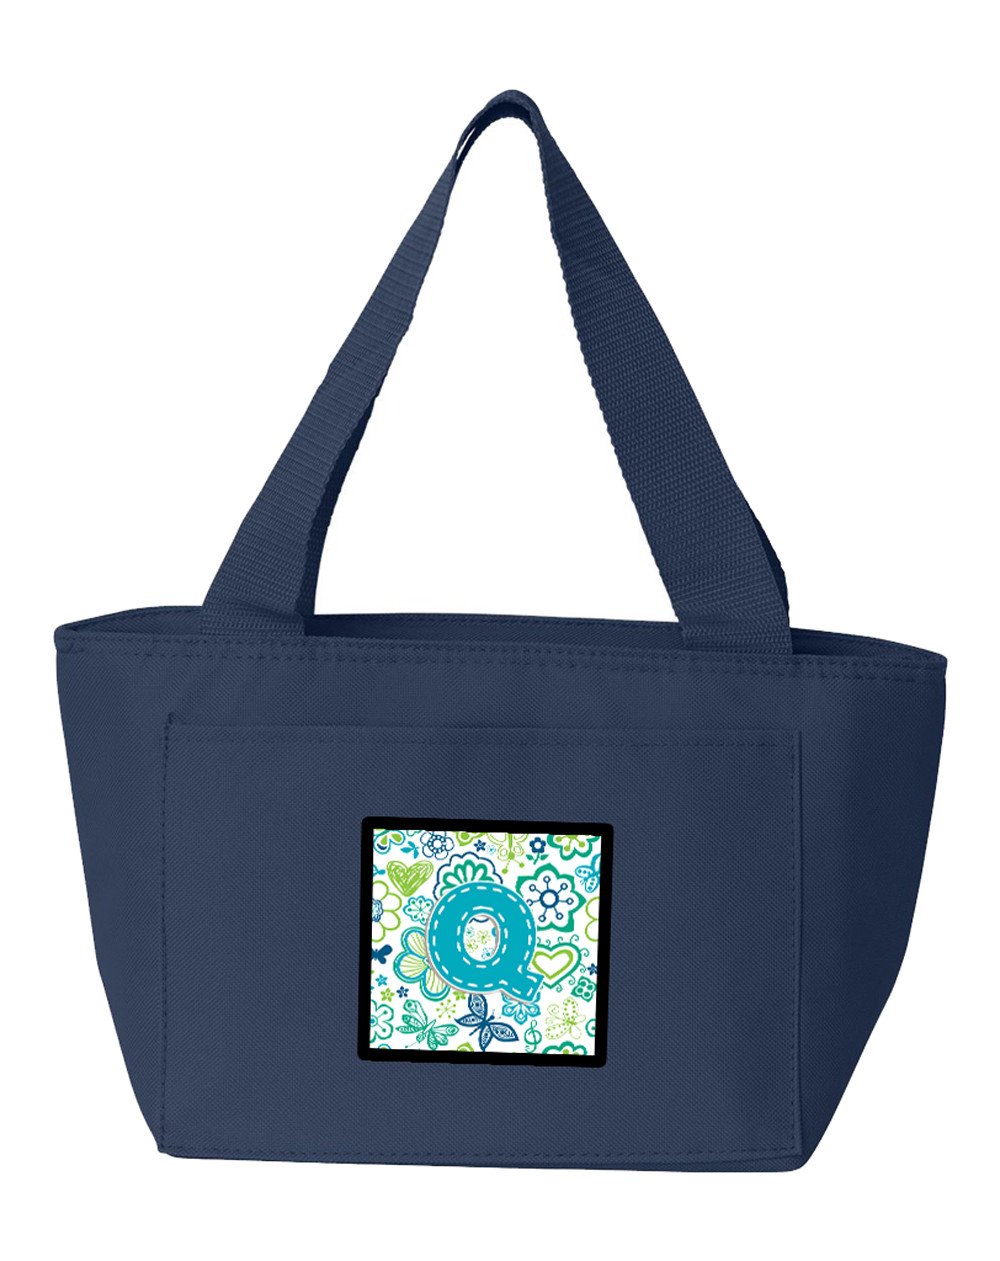 Letter Q Flowers and Butterflies Teal Blue Lunch Bag CJ2006-QNA-8808 by Caroline's Treasures